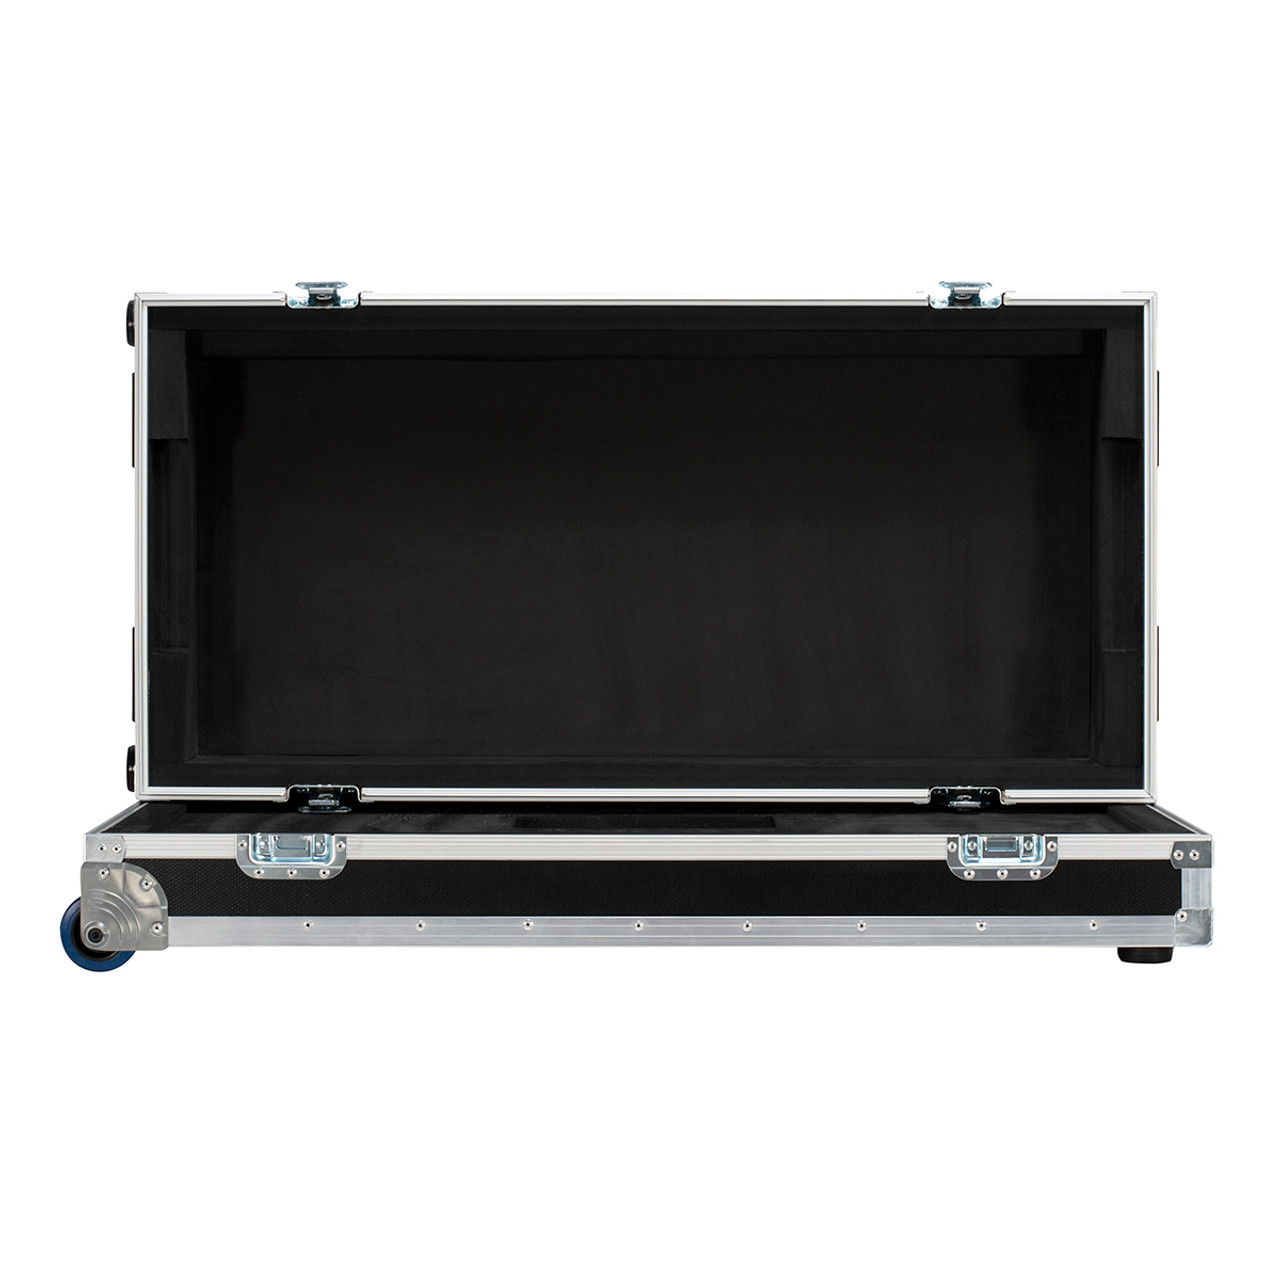 Elation DRCNX4 Road Case For NX4